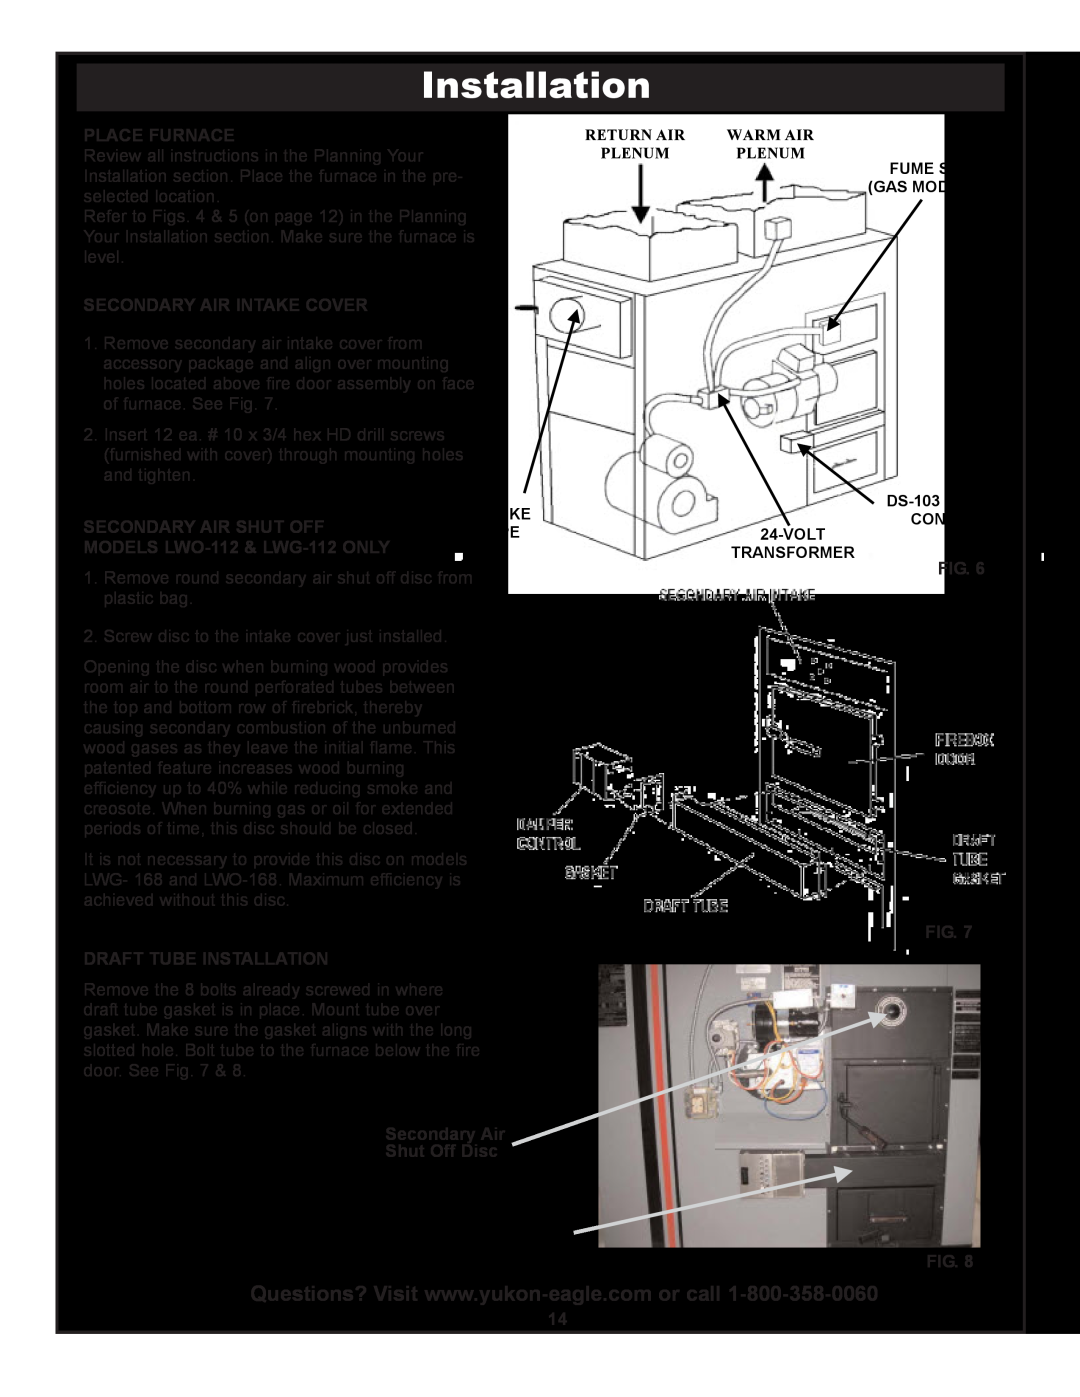 Yukon Advanced Optics Oil Furnace Place Furnace, Secondary Air Intake Cover, Draft Tube Installation, Fig. Fig 